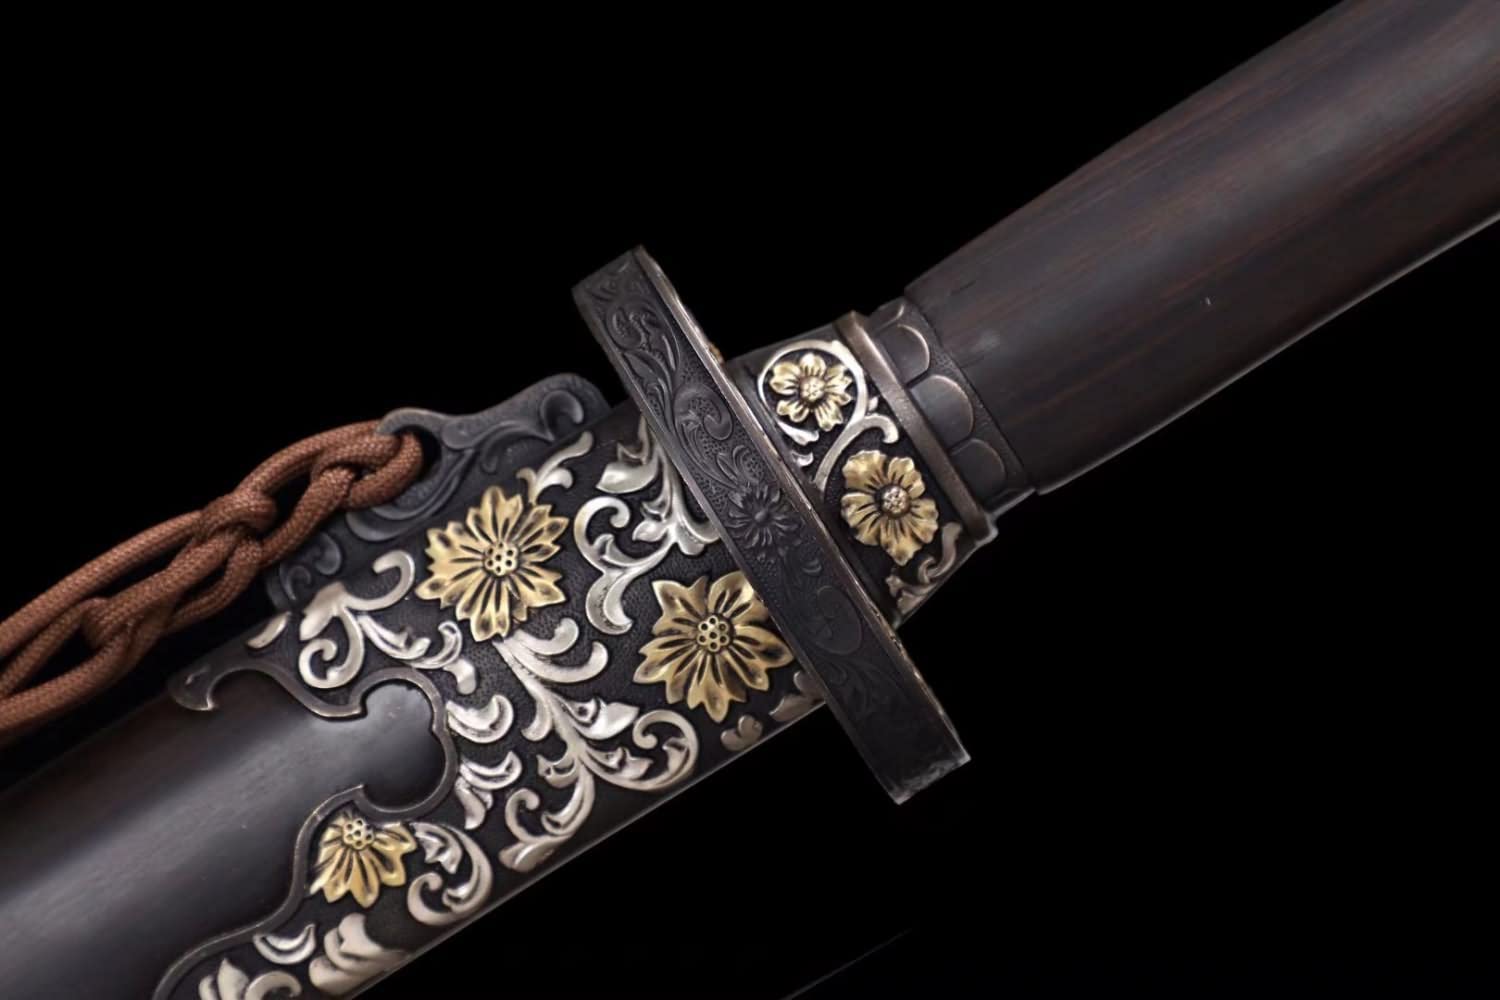 Qing dao,Forged Damascus Steel Blade,Ebony Scabbard,Brass Fittings